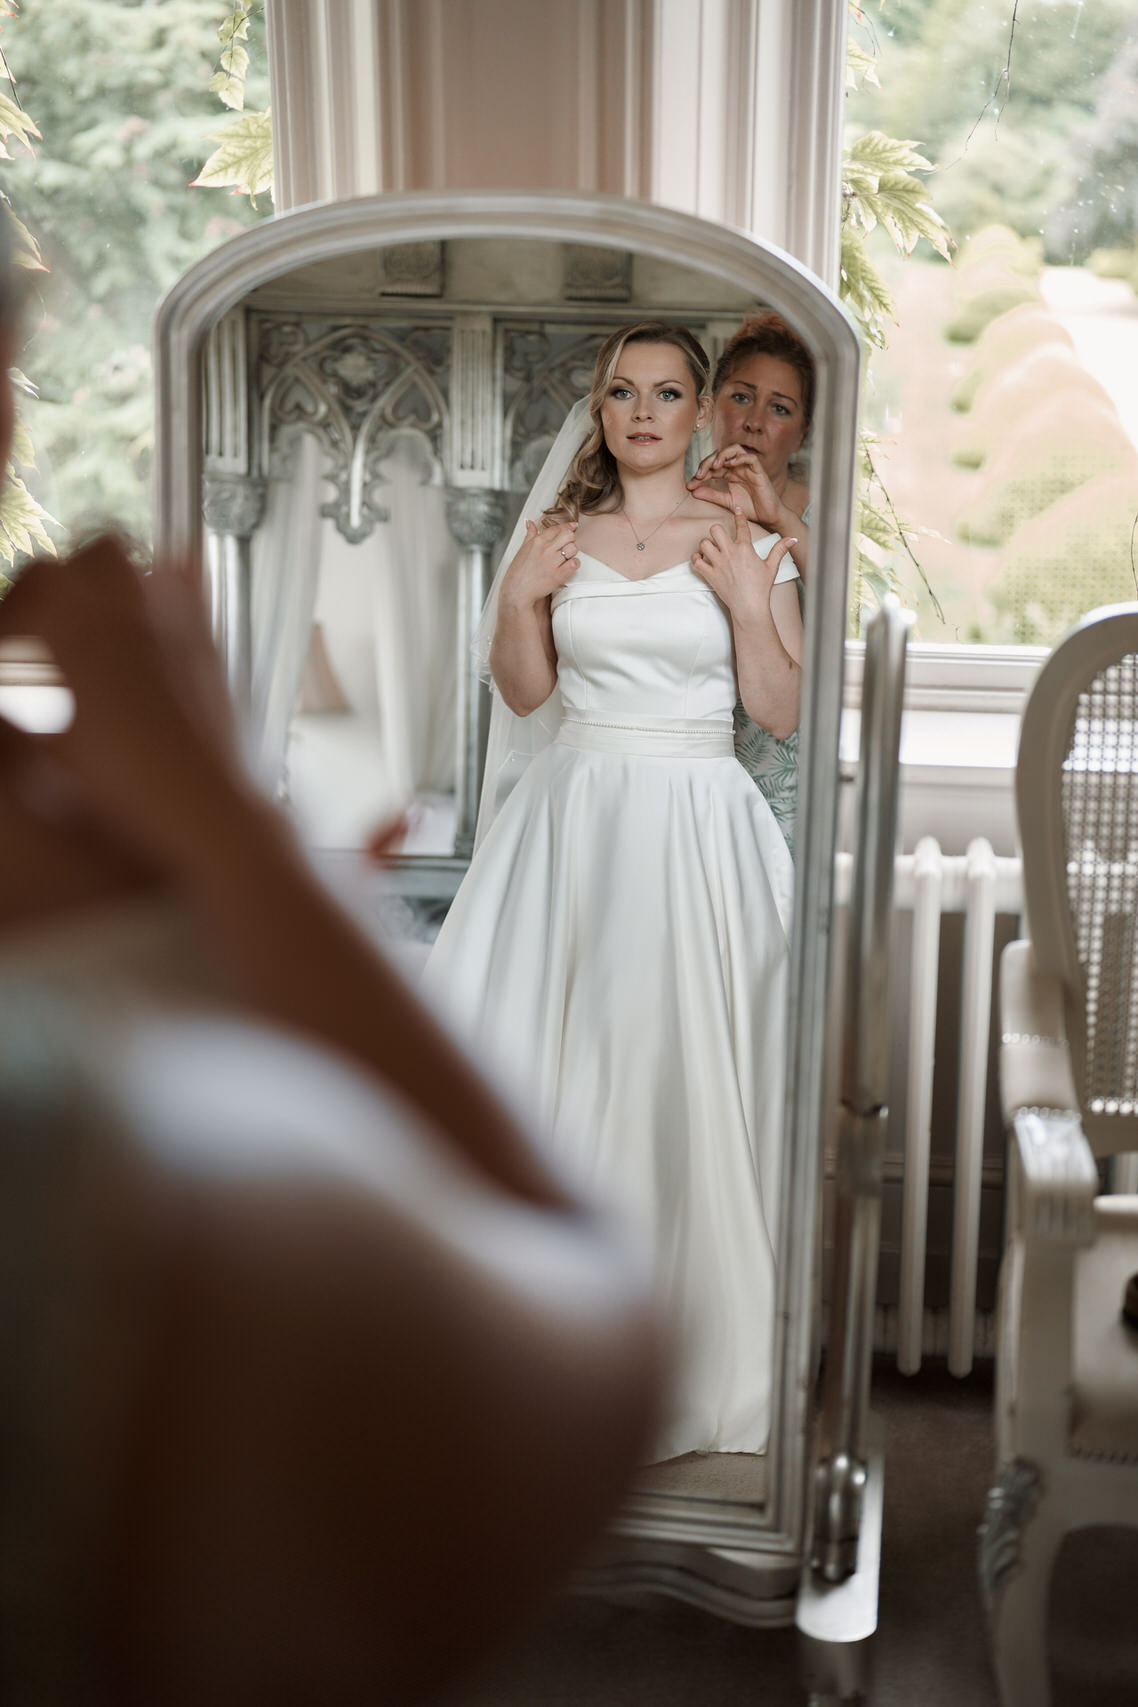 A woman is getting into her wedding dress in front of a mirror.